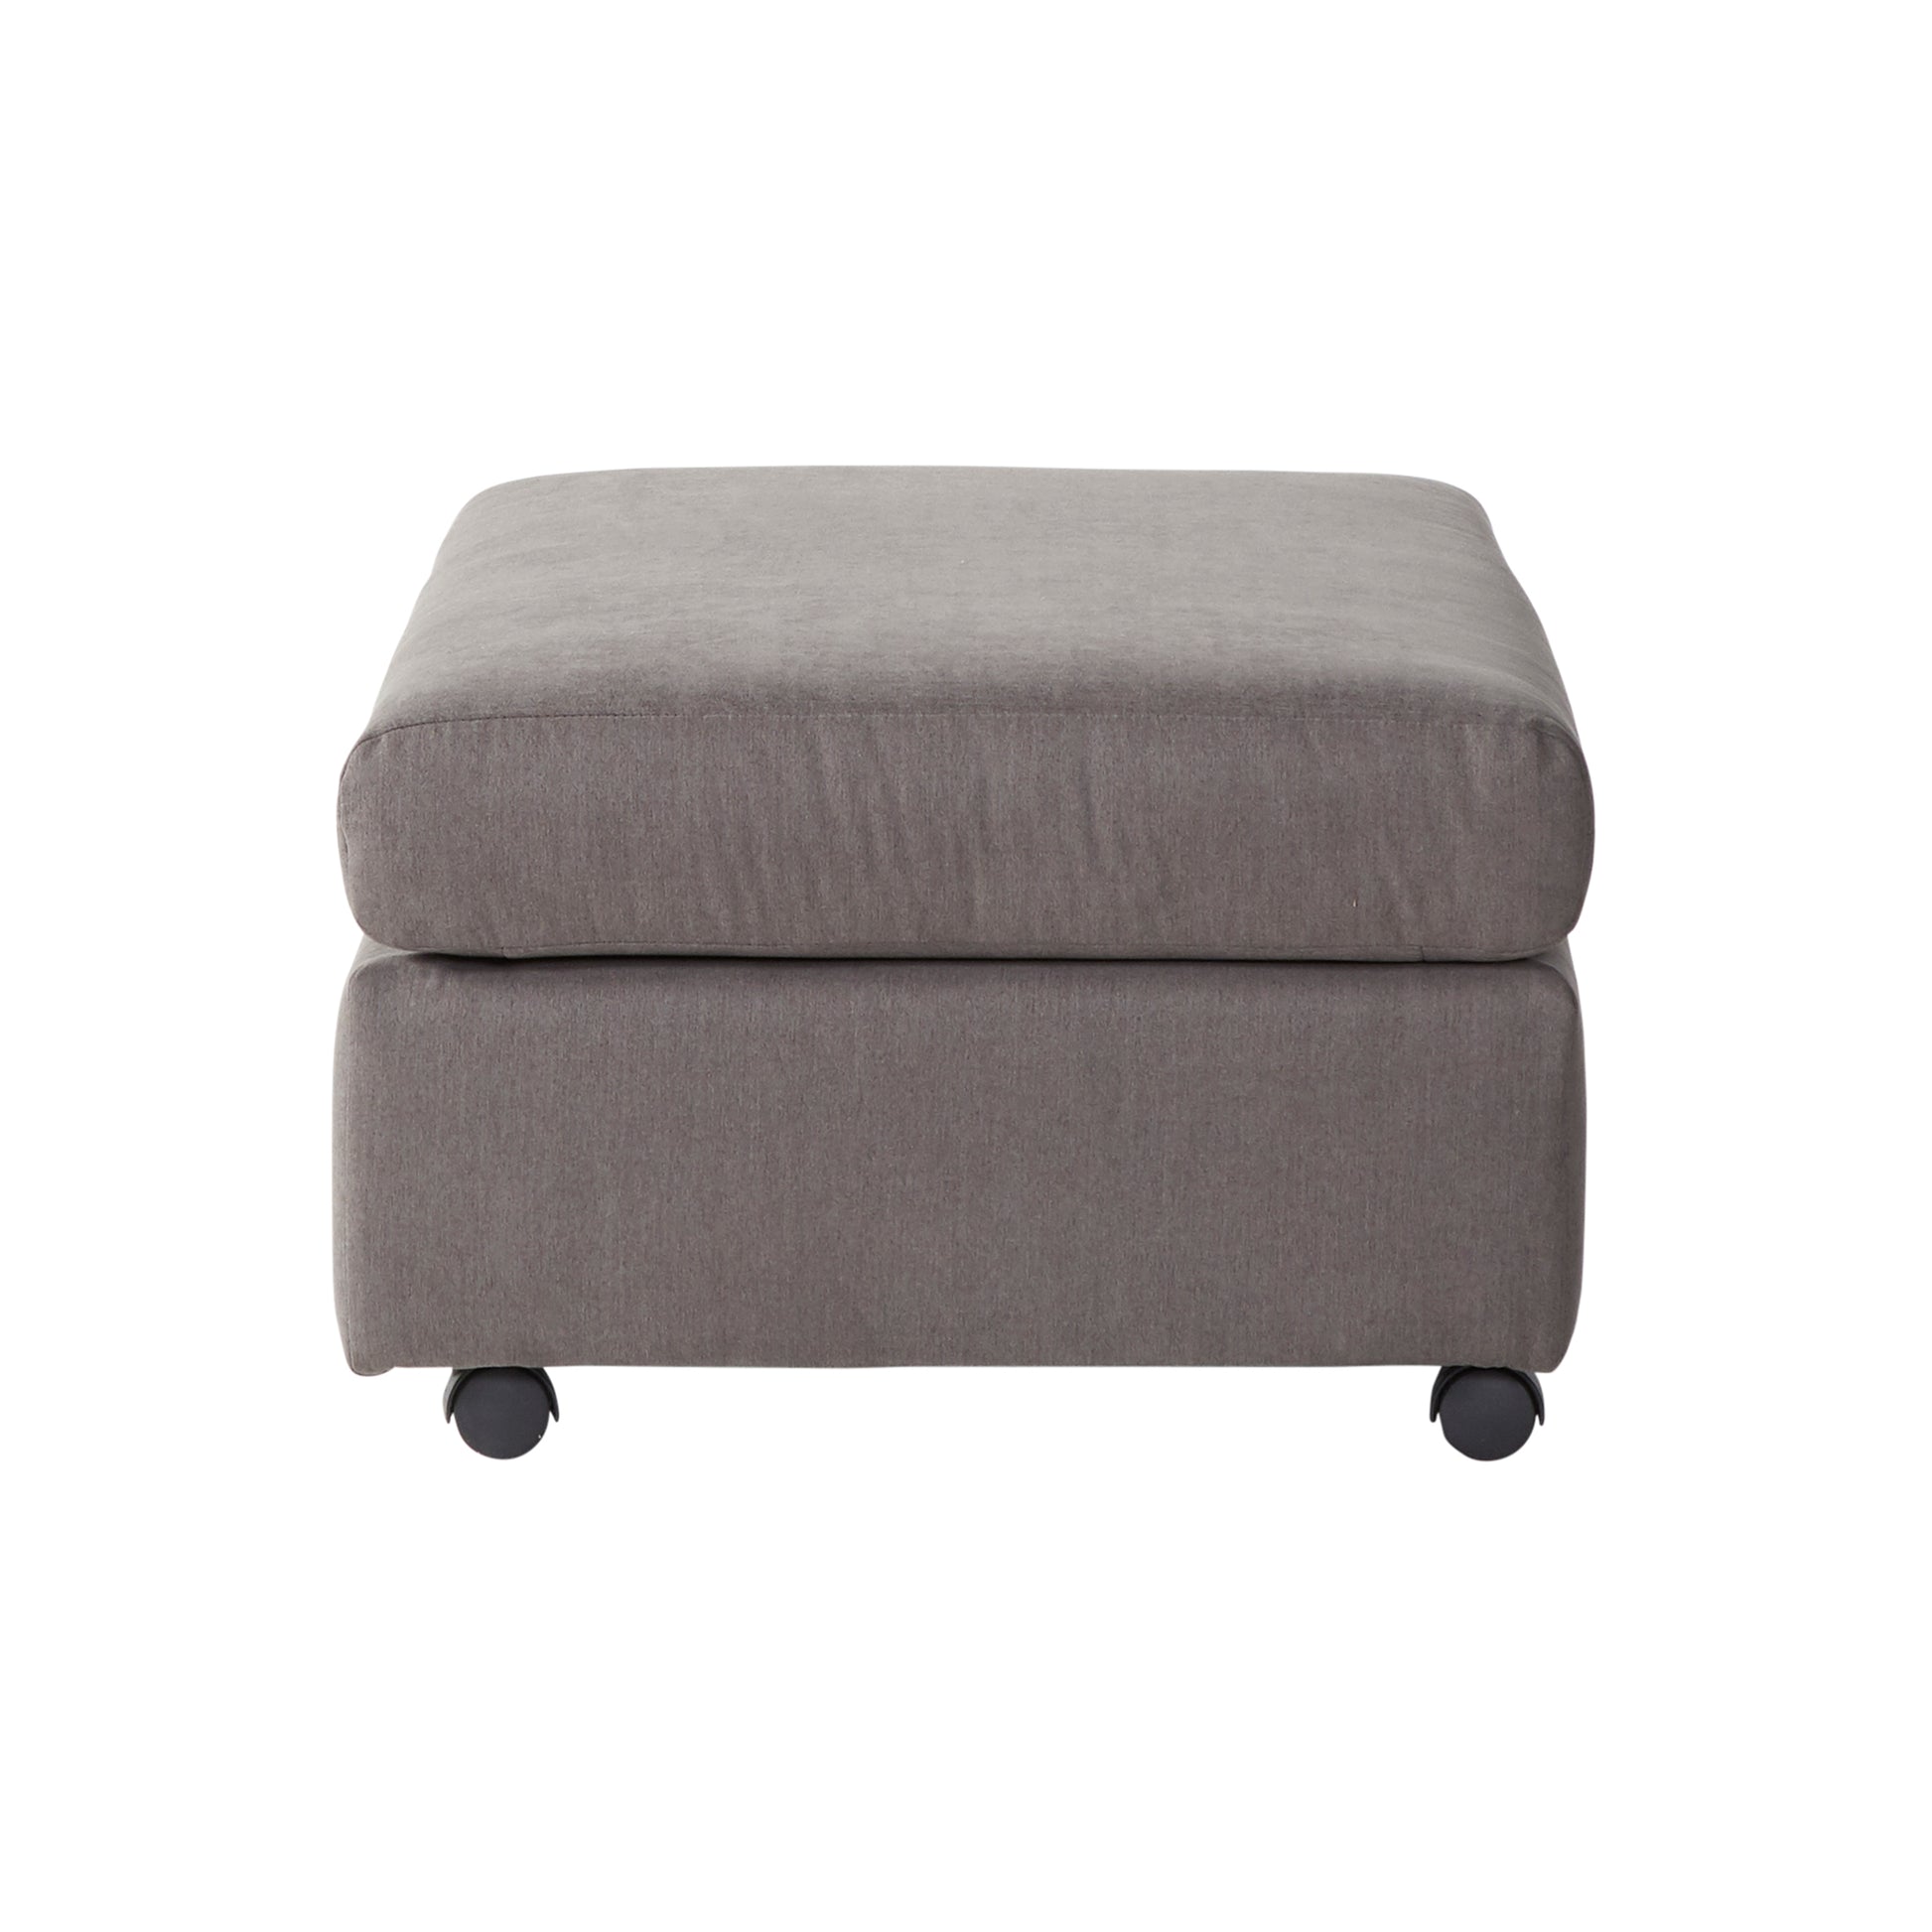 Roundhill Furniture Enda Pillow Back Fabric Sofa and Cuddler Chair Liv